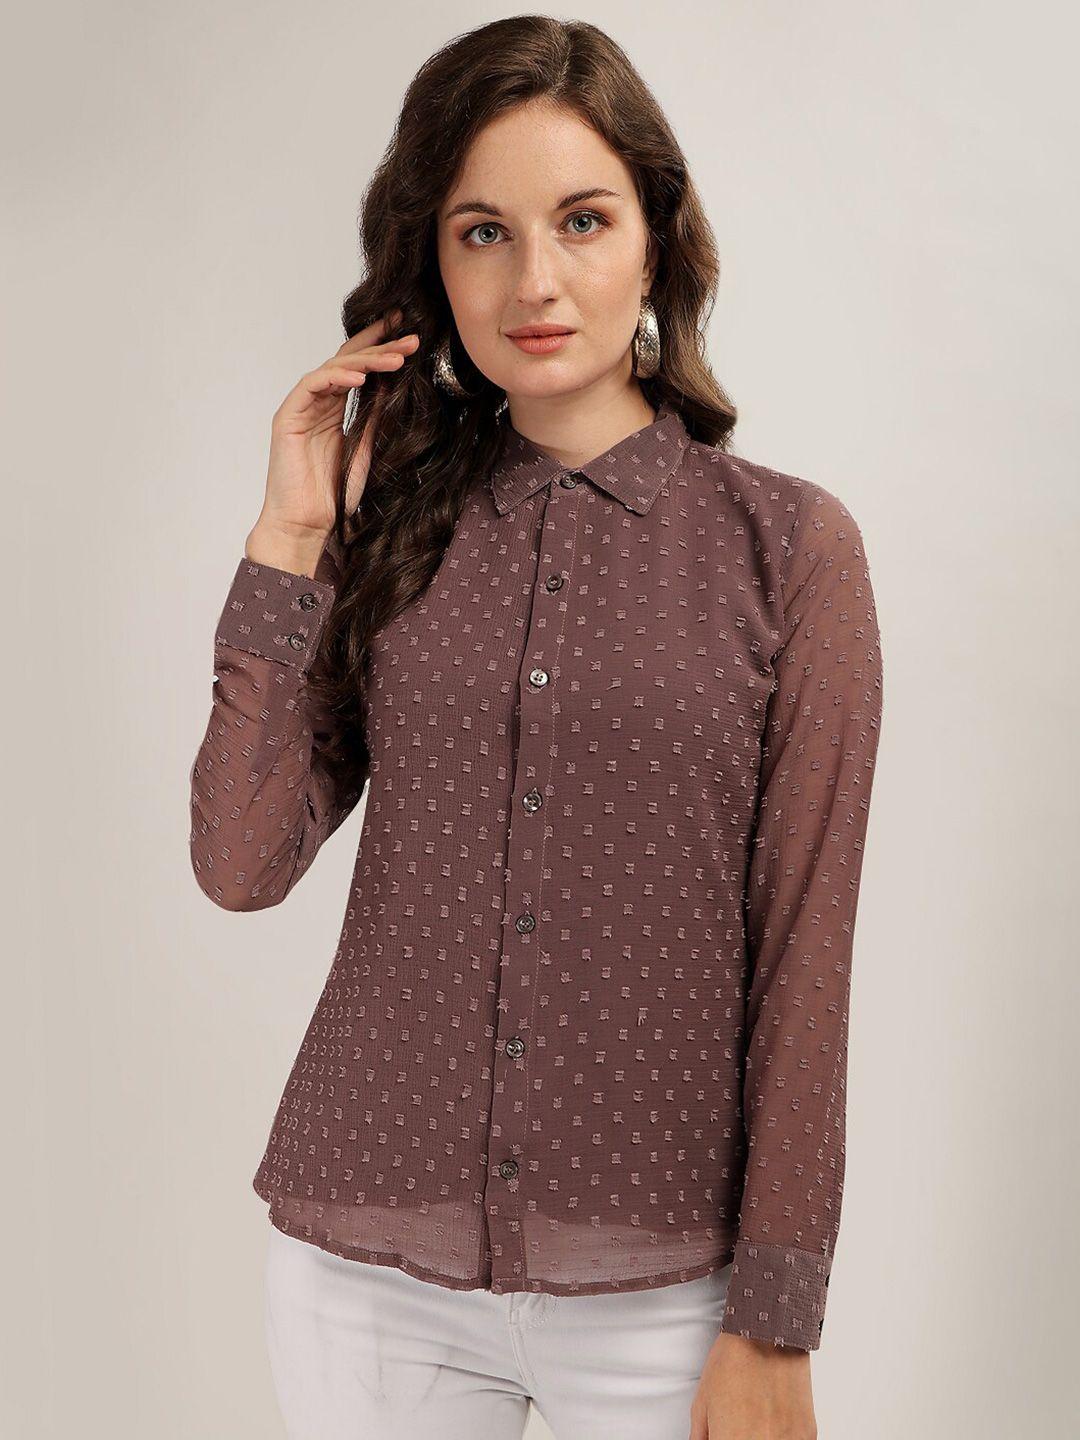 prettify brown georgette shirt style top